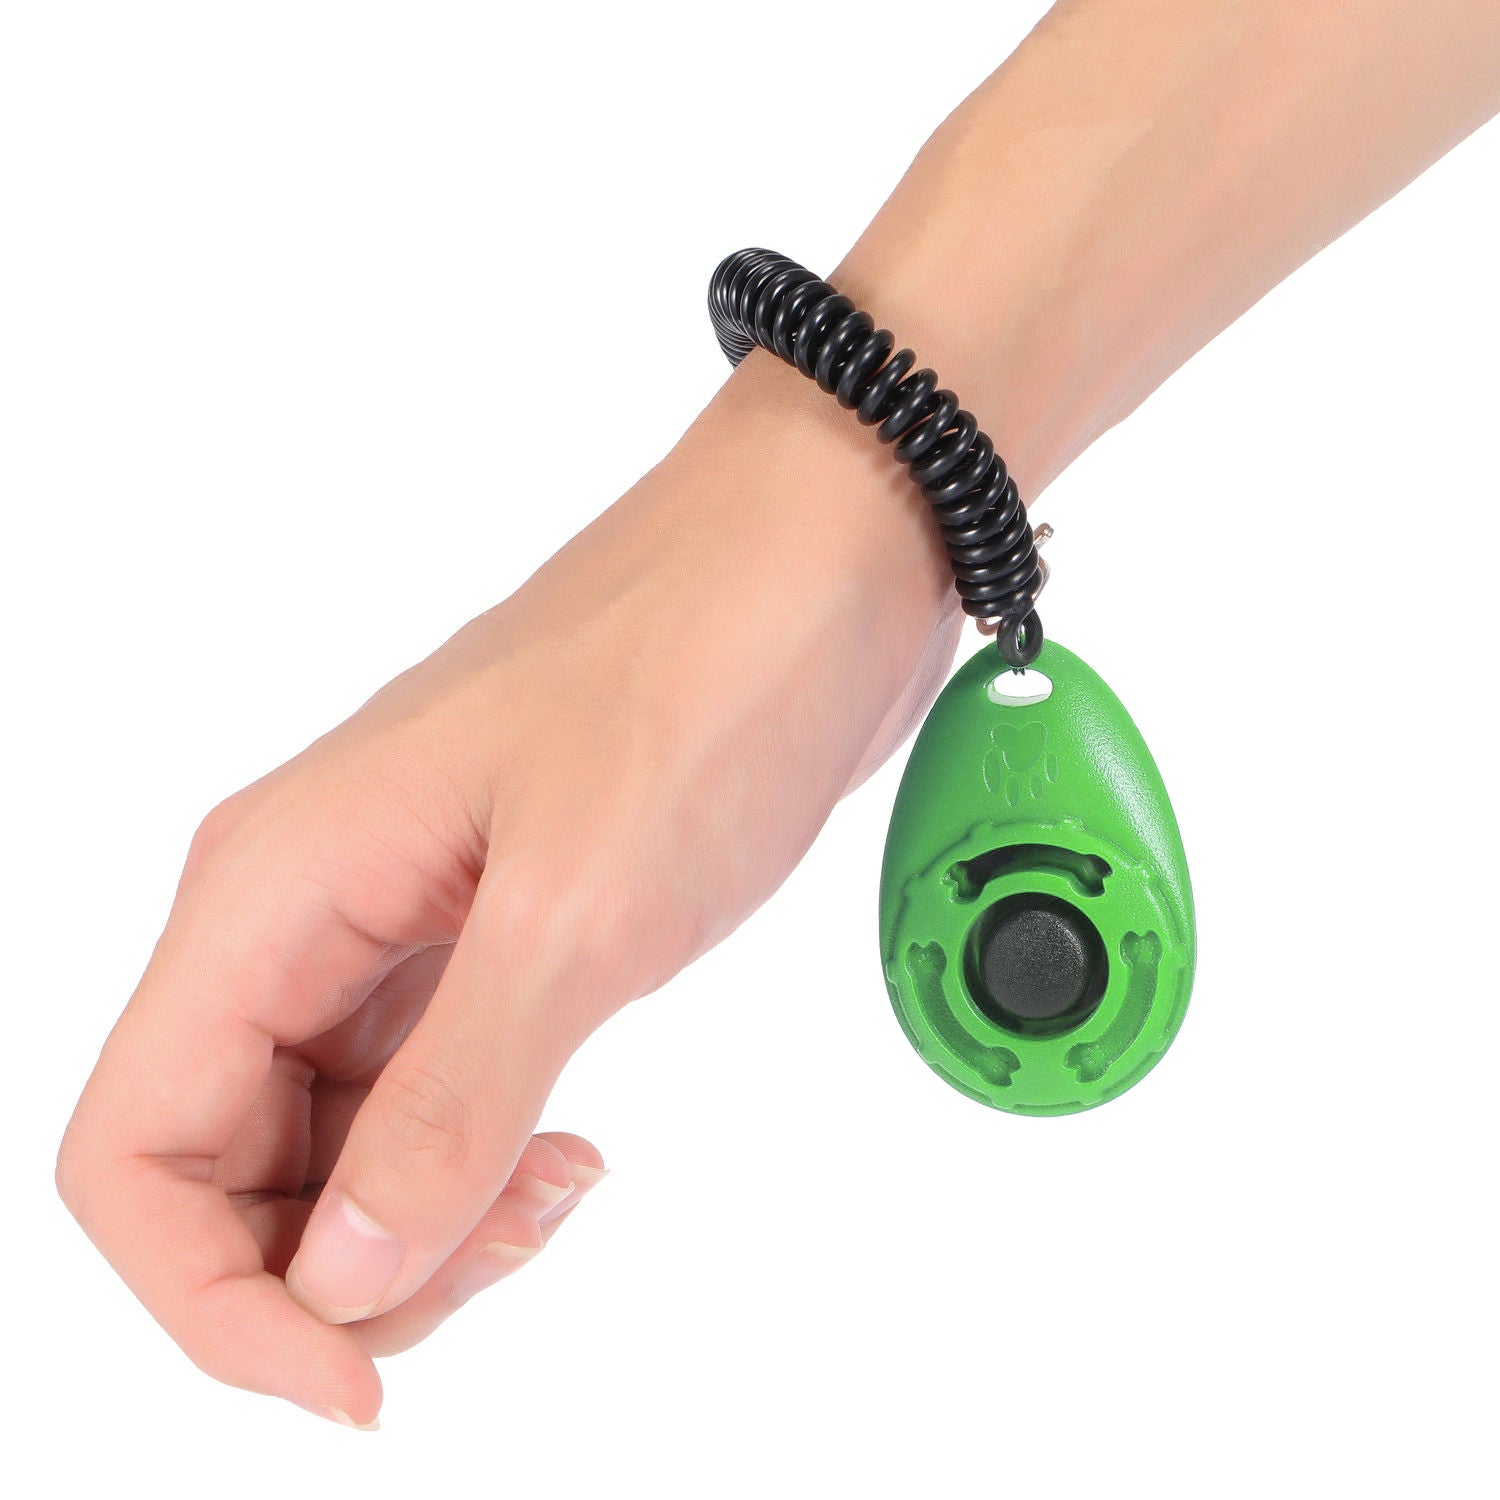 Wrist Strap for Convenience The dog clicker comes with a wrist strap allowing you to keep the clicker within reach at all times